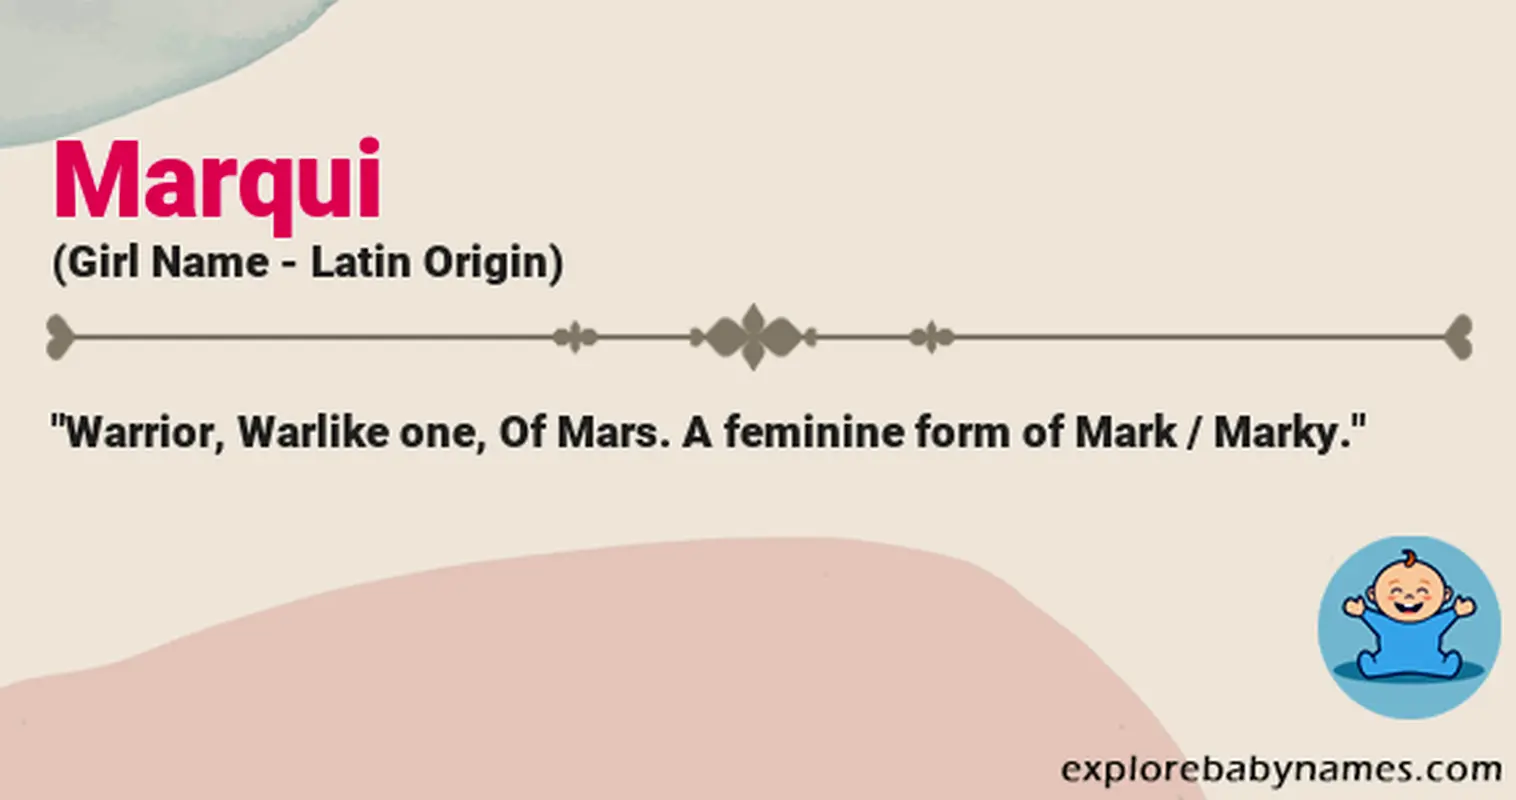 Meaning of Marqui